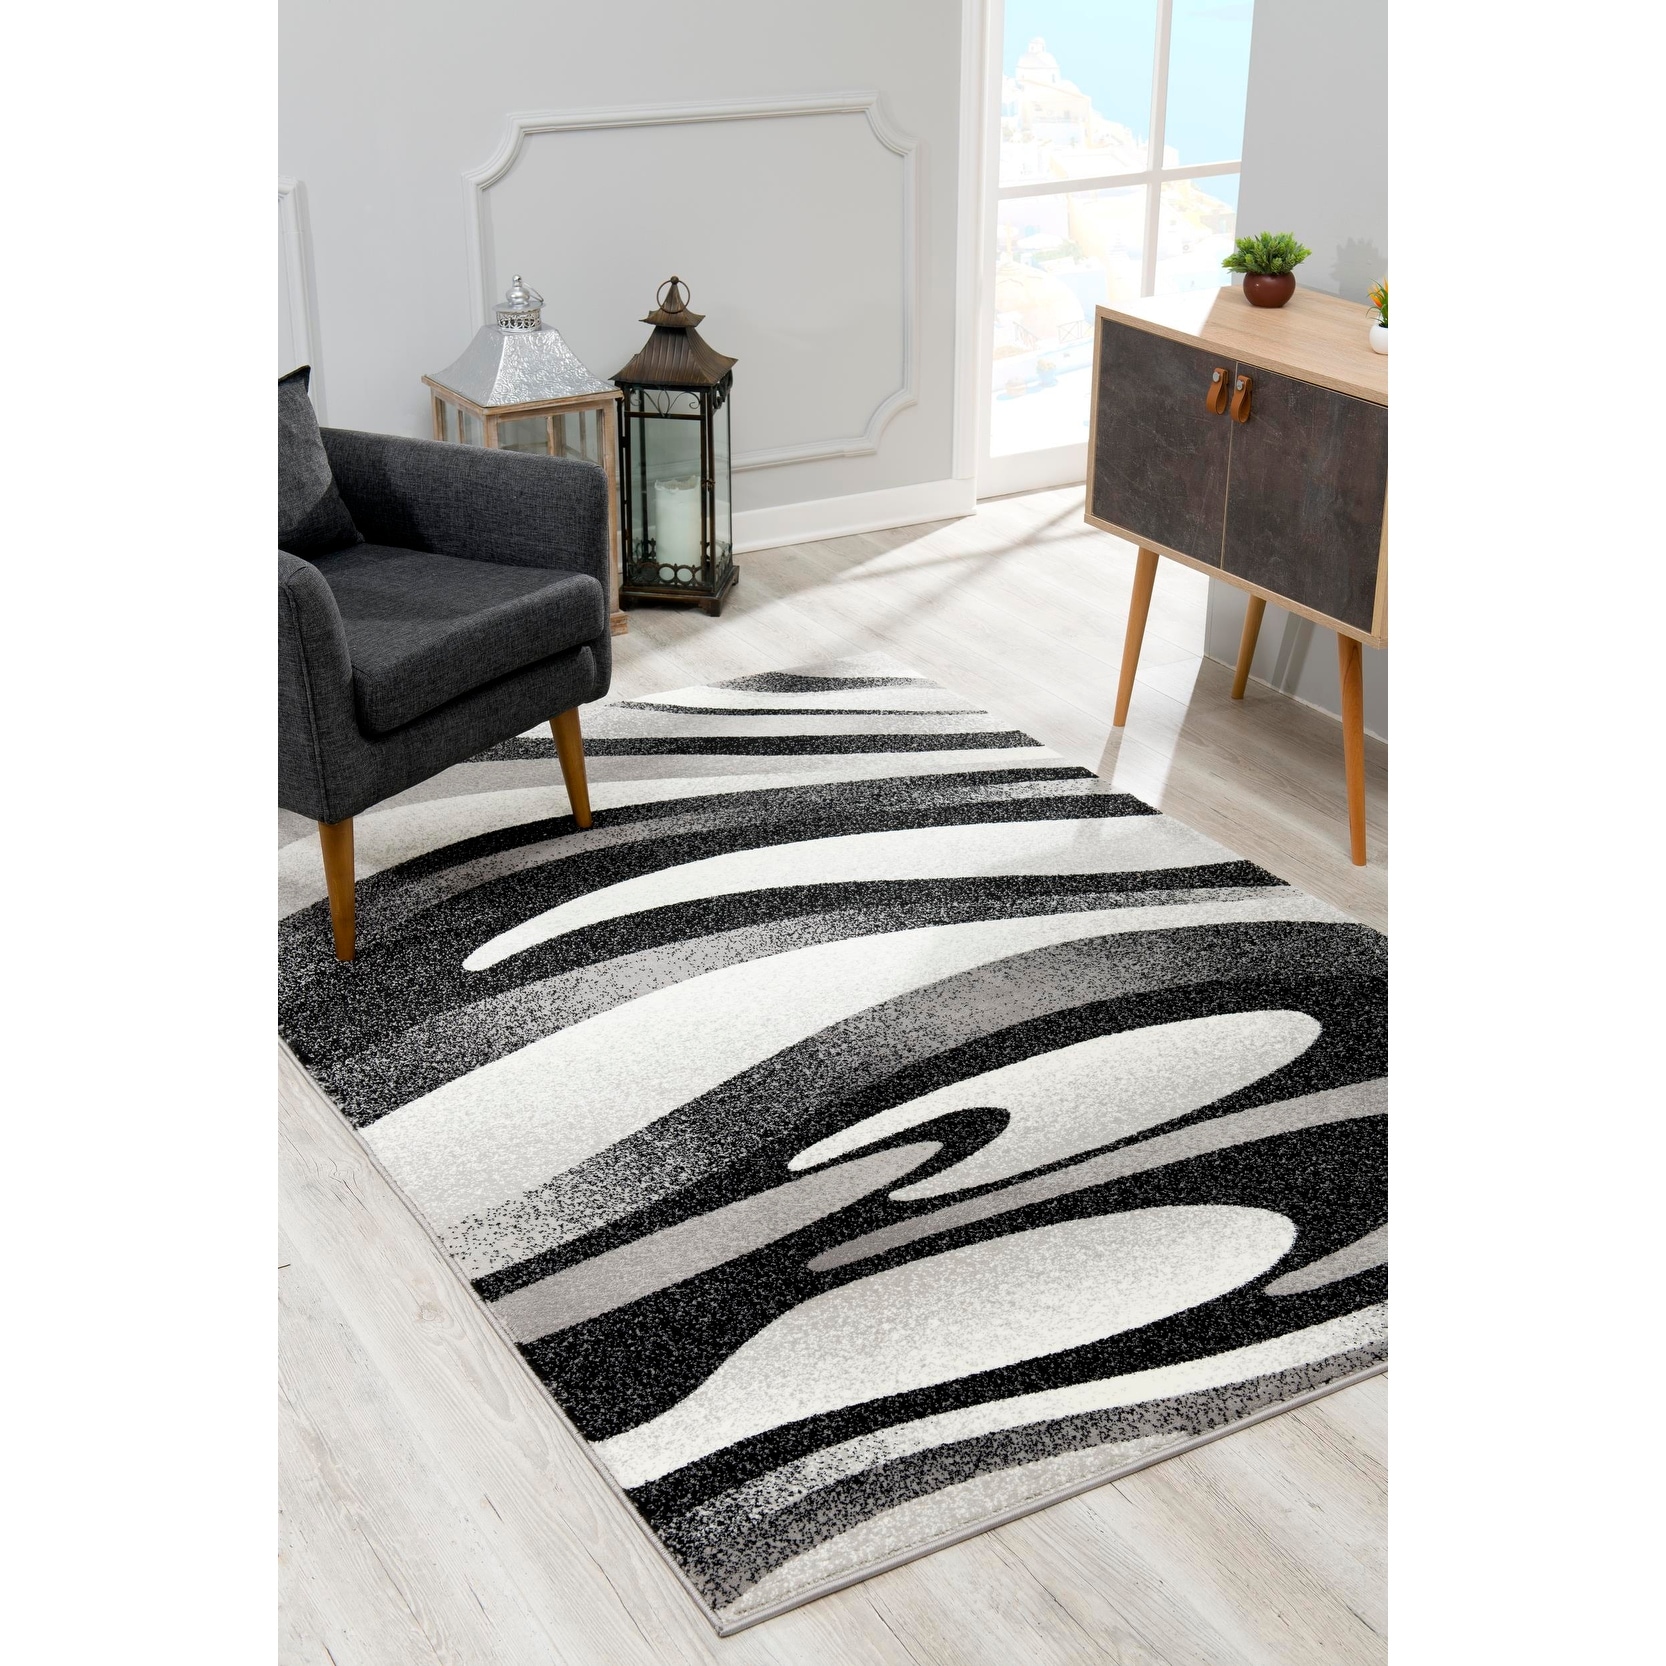 https://ak1.ostkcdn.com/images/products/is/images/direct/12a35fae4c044f625735627aa9a3d4bd87149d22/Rug-Branch-Modern-Abstract-Boho-Indoor.jpg